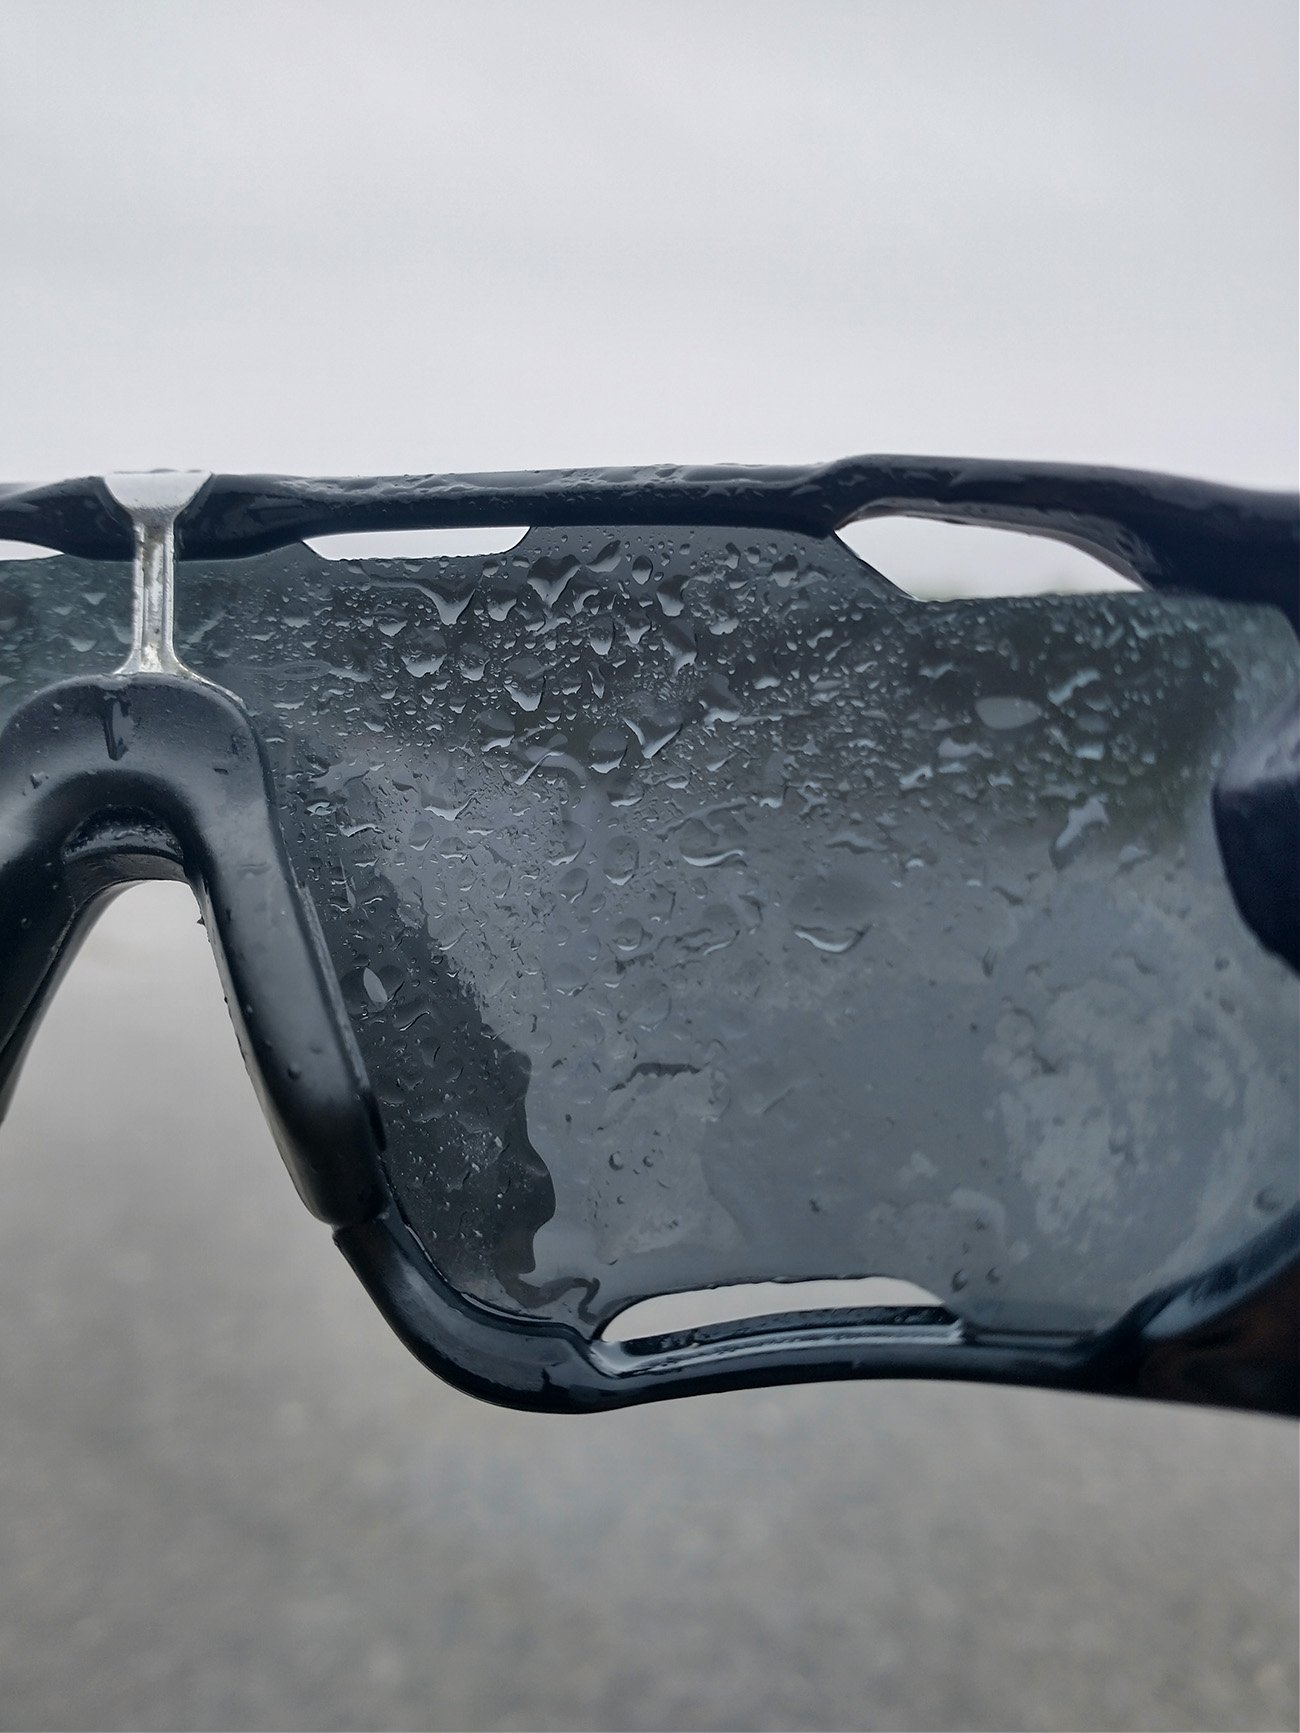 This is reason#41 why it sucks to ride in the rain. Glasses get droplets inside and out so you can't see anything. But you can't take the off otherwise the wind and rain blind you anyway.